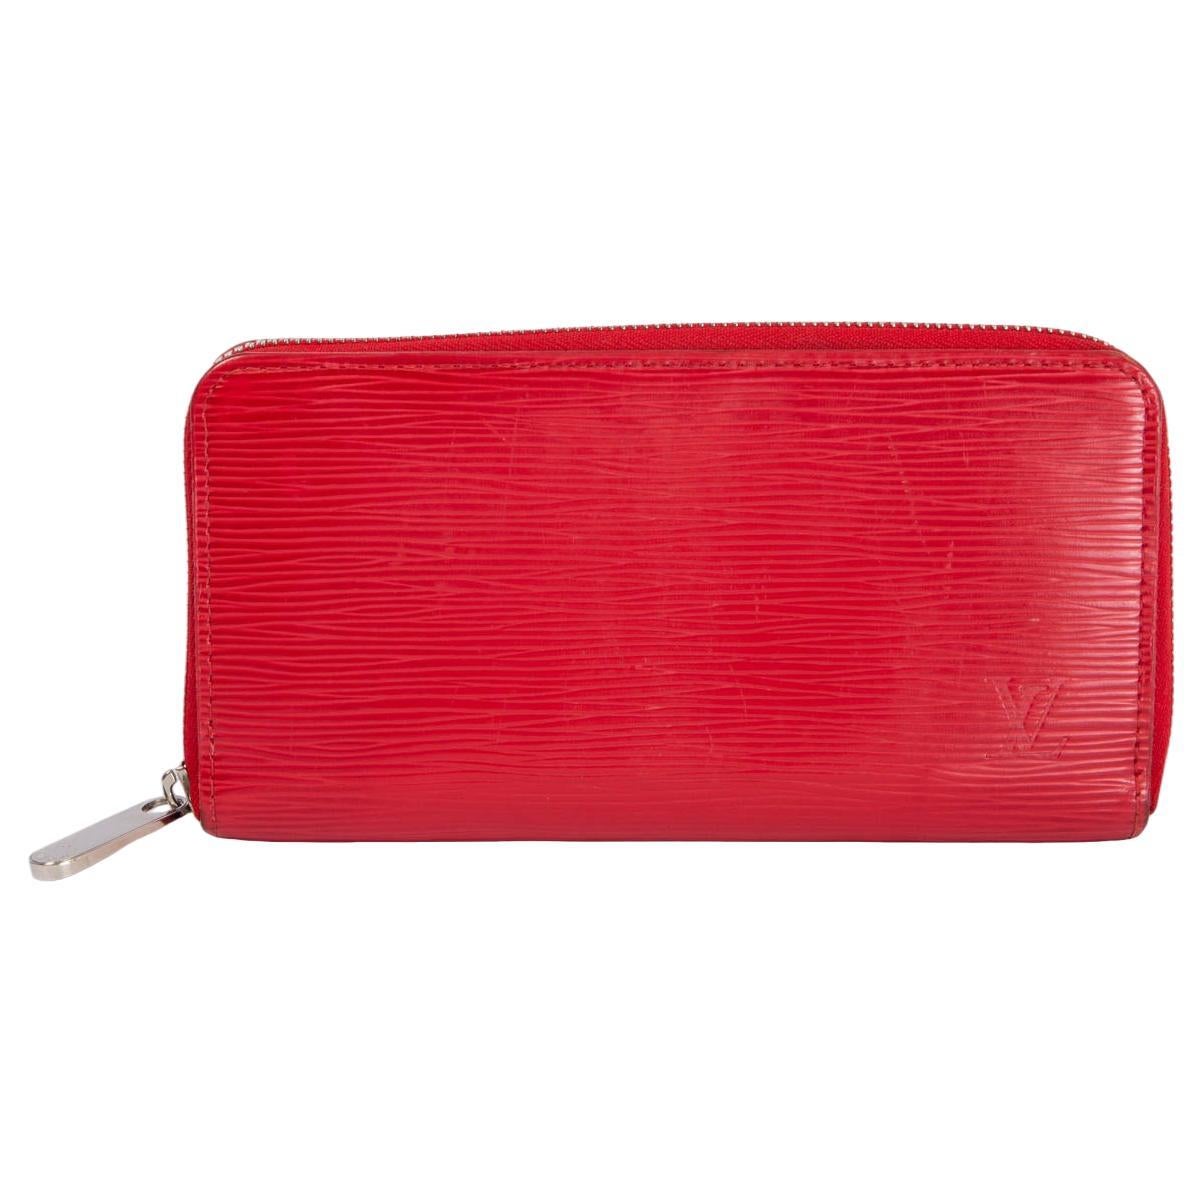 LOUIS VUITTON Rouge red Epi leather ZIPPY Wallet For Sale